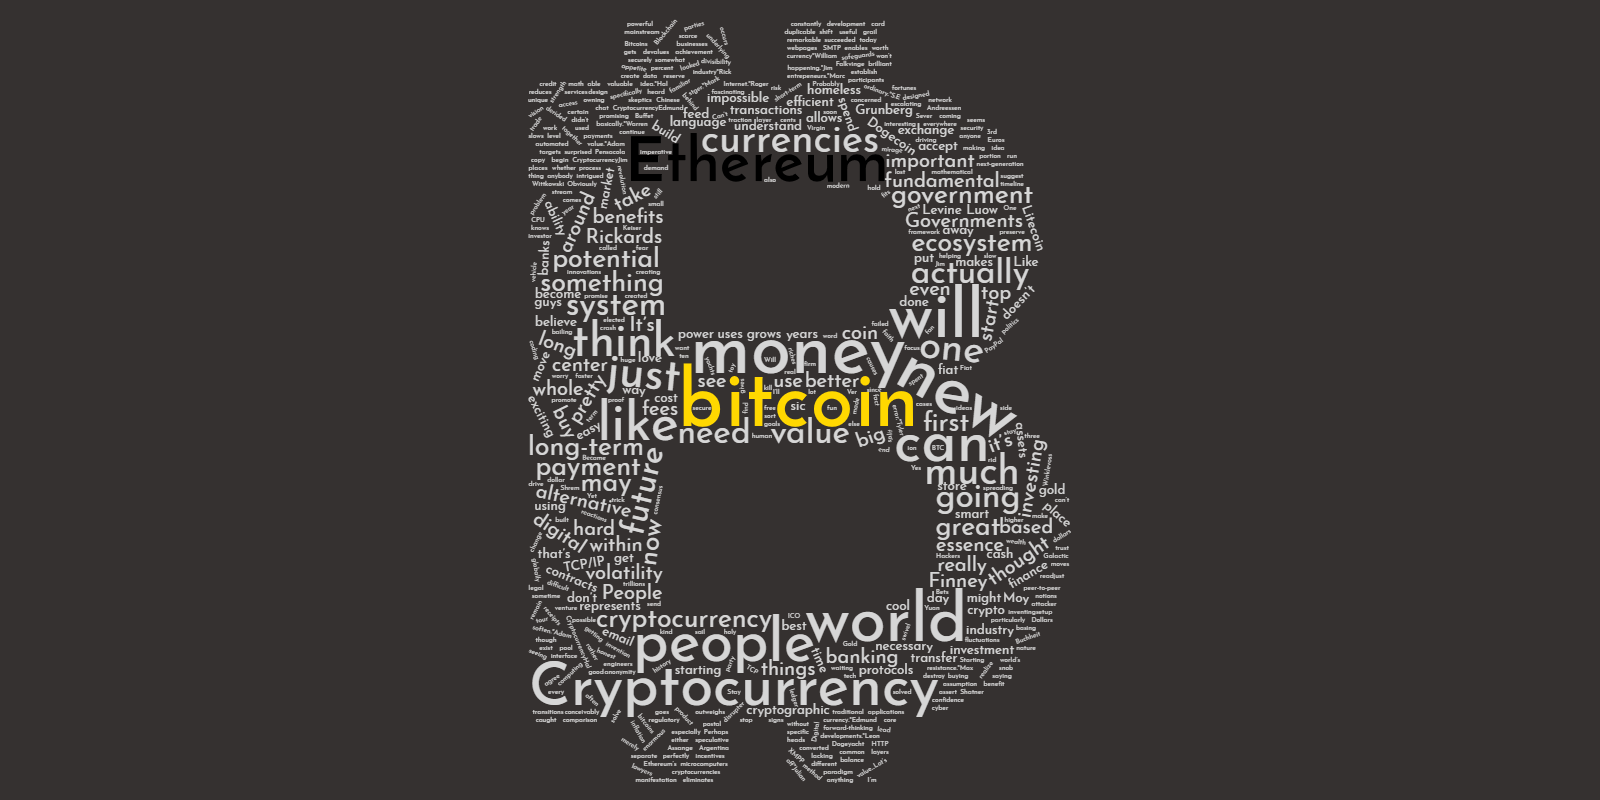 Cryptocurrency Quotes: Leaders Talk Bitcoin, Ethereum, and Blockchain